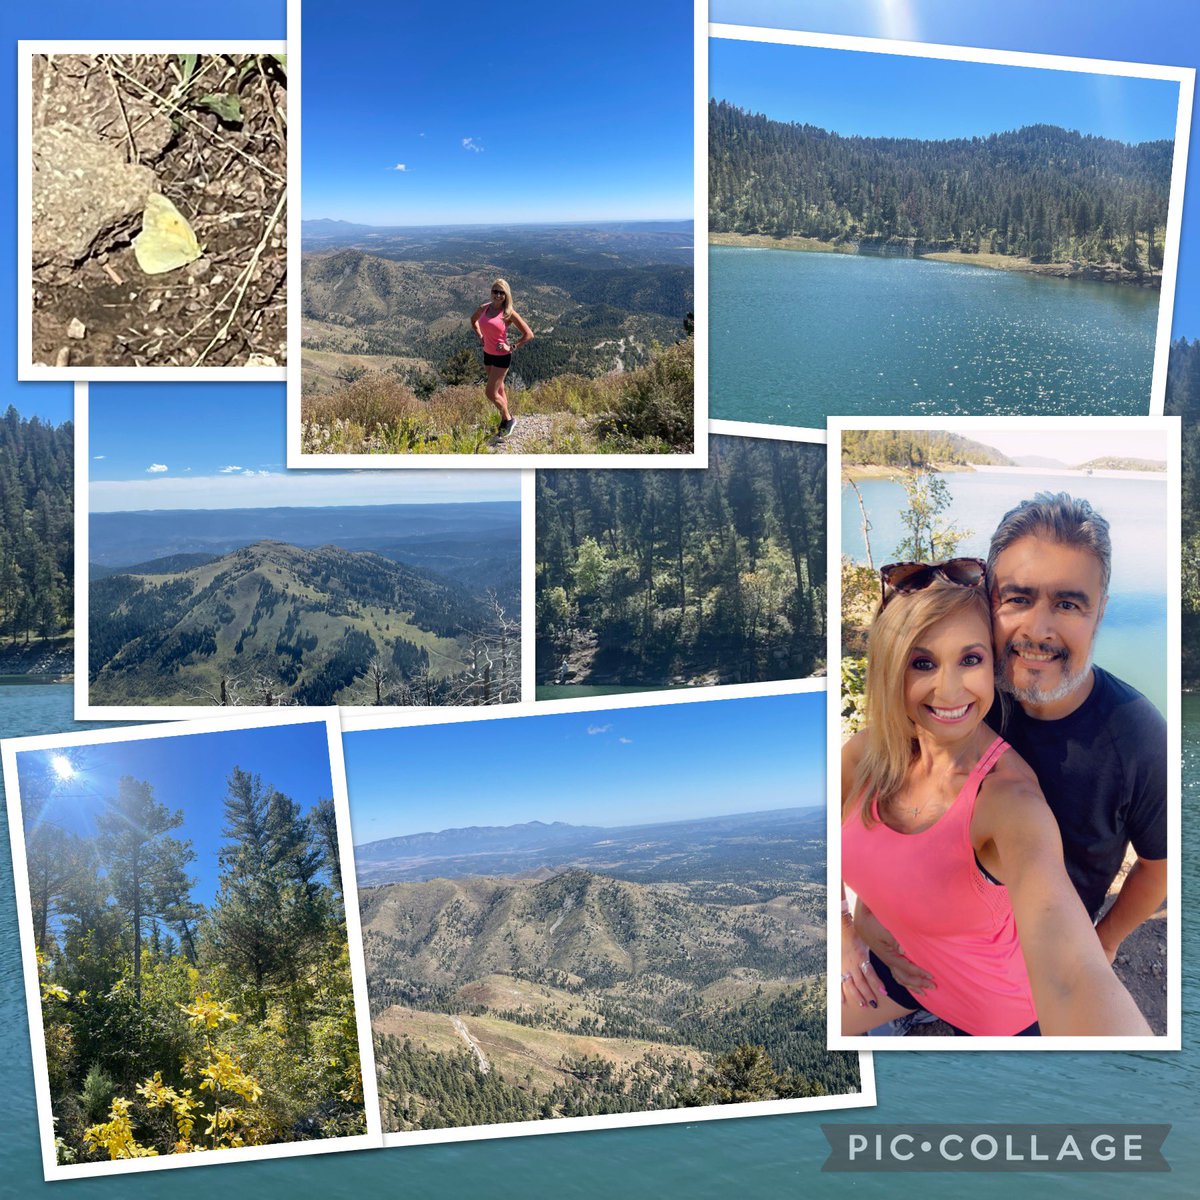 The best view comes after the hardest climb. ⛰🌲🥾🦋 Enjoyed a 5 mile hike in Ruidoso on this beautiful #Thursday afternoon. #outdooradventures #hiking #viewfromthetop #fallvibes #fitover40 #FitLeaders @zjgalvan @PrincipalRoRod @DiocelinaBelle @BetsyCallanan @educategalore